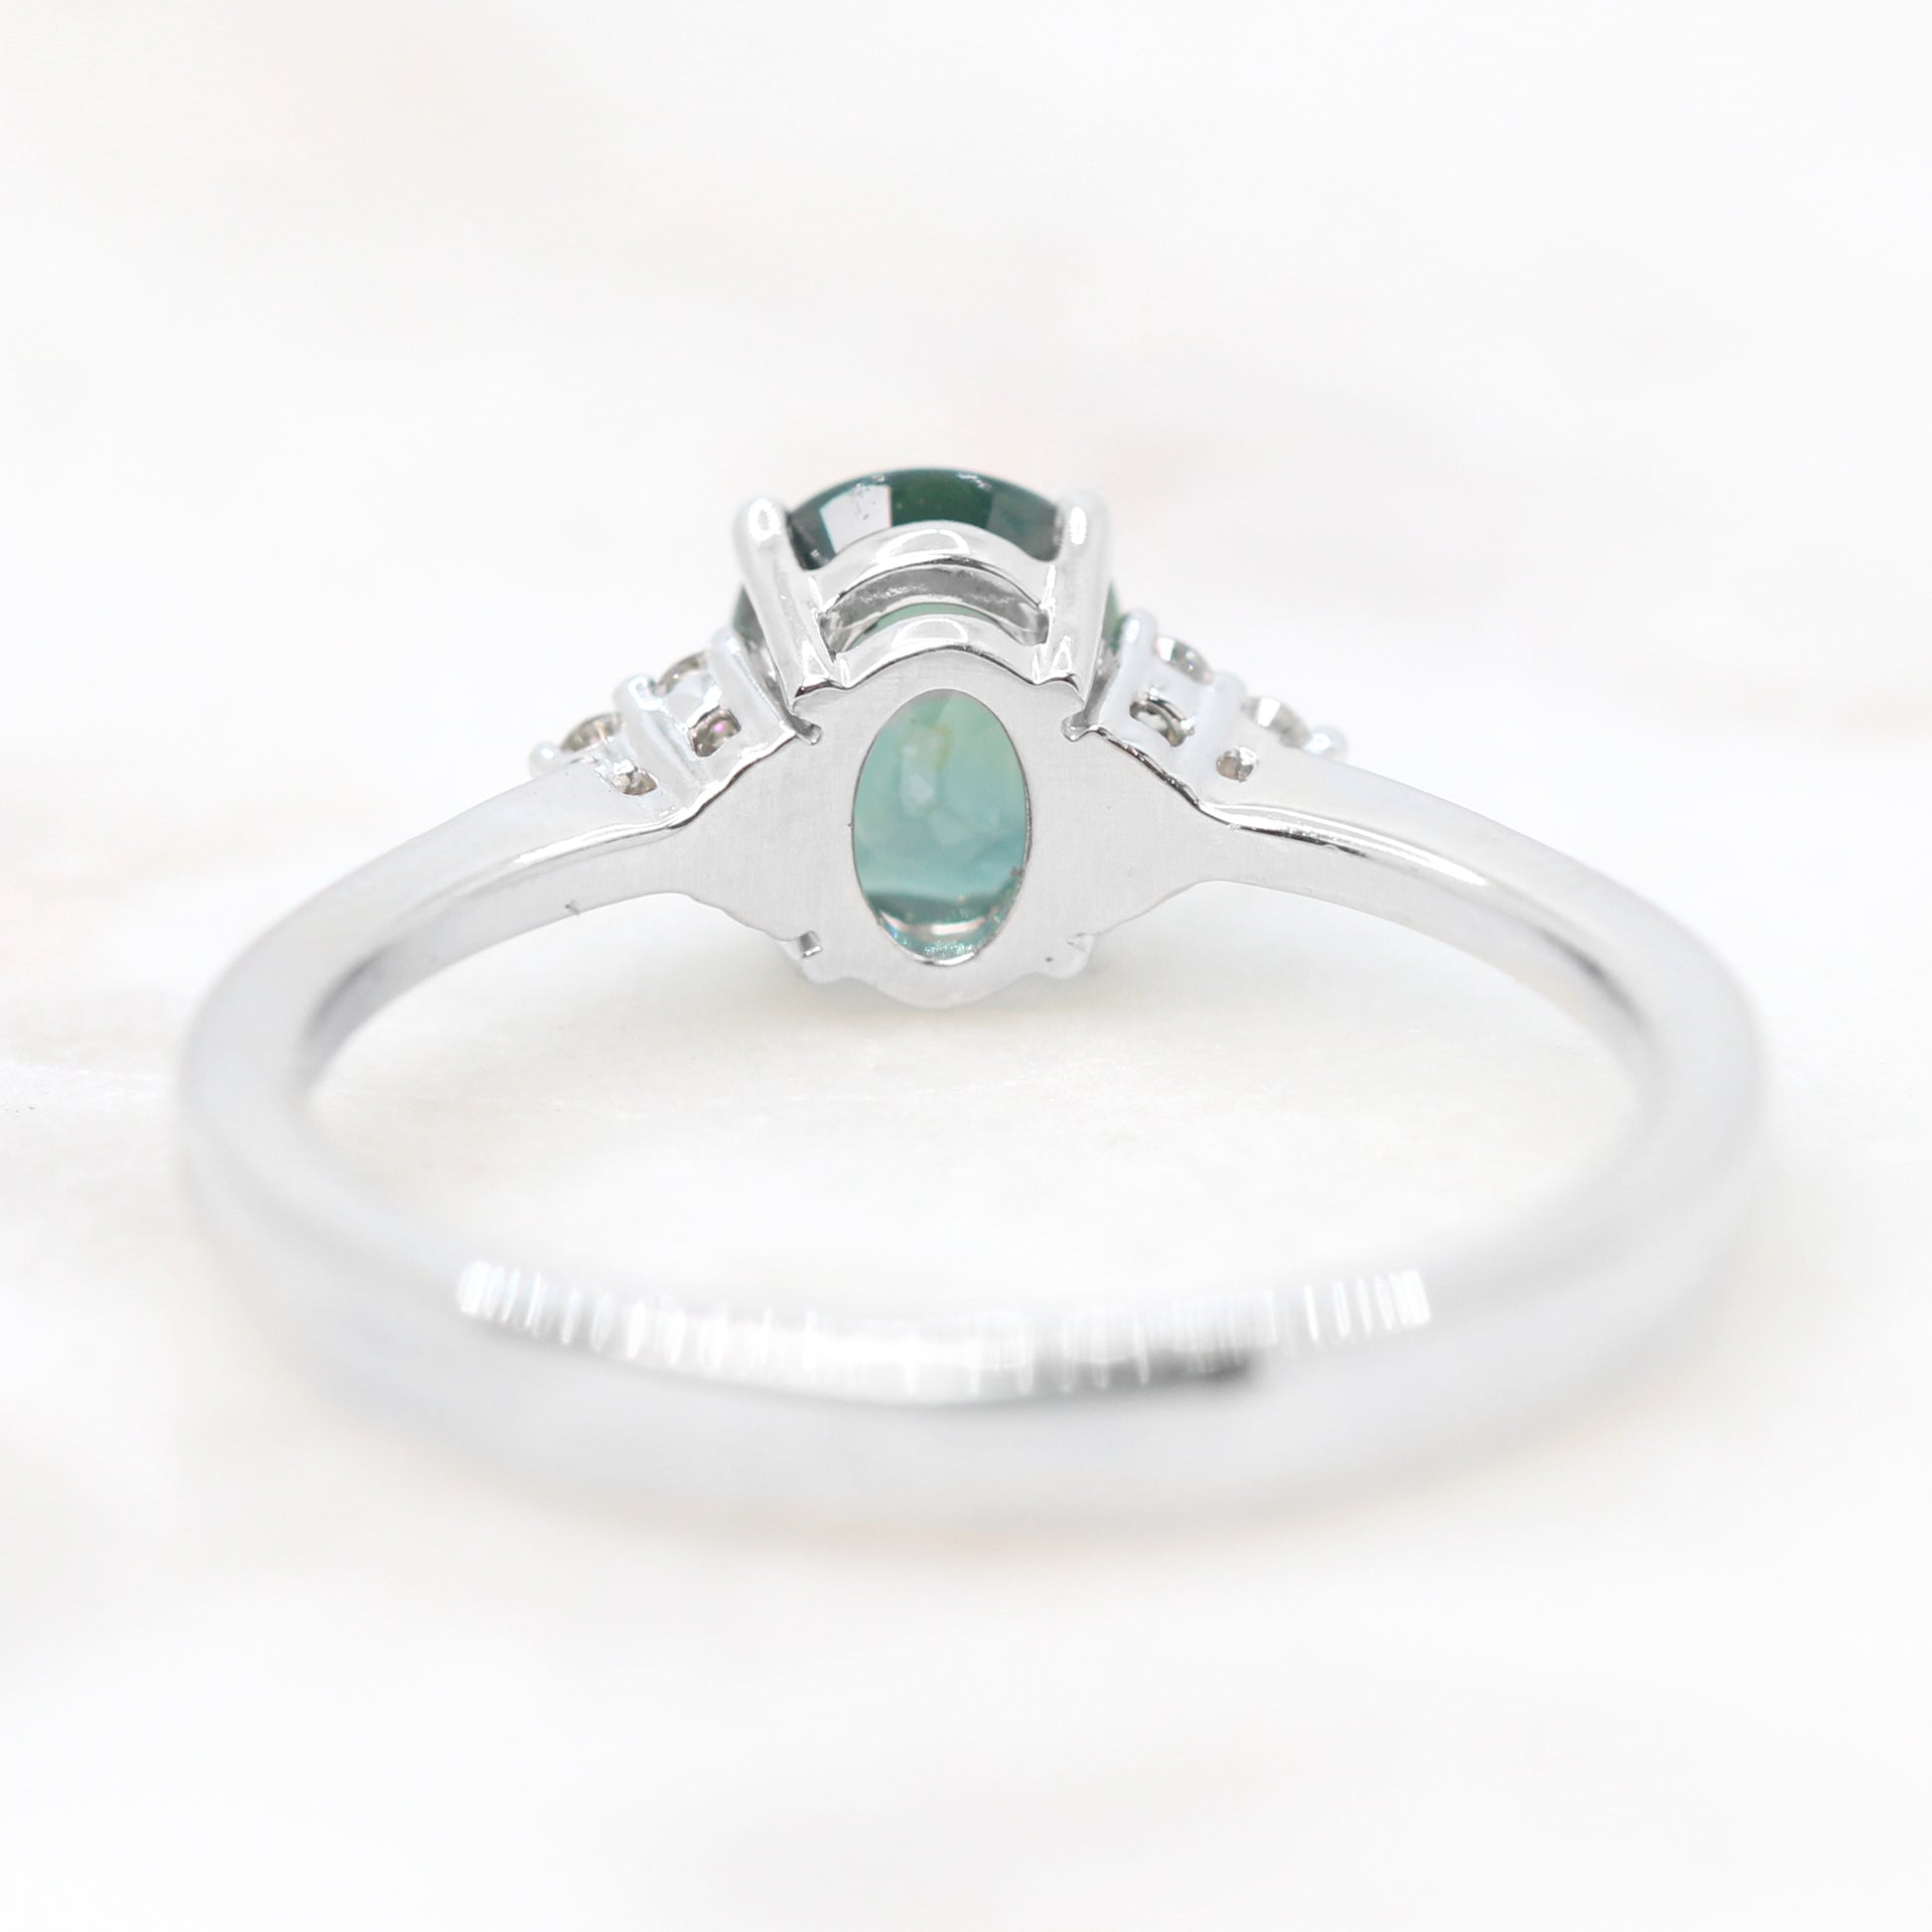 Imogene Ring with a 1.05 Carat Light Teal Oval Sapphire and White Accent Diamonds in 14k White Gold - Ready to Size and Ship - Midwinter Co. Alternative Bridal Rings and Modern Fine Jewelry